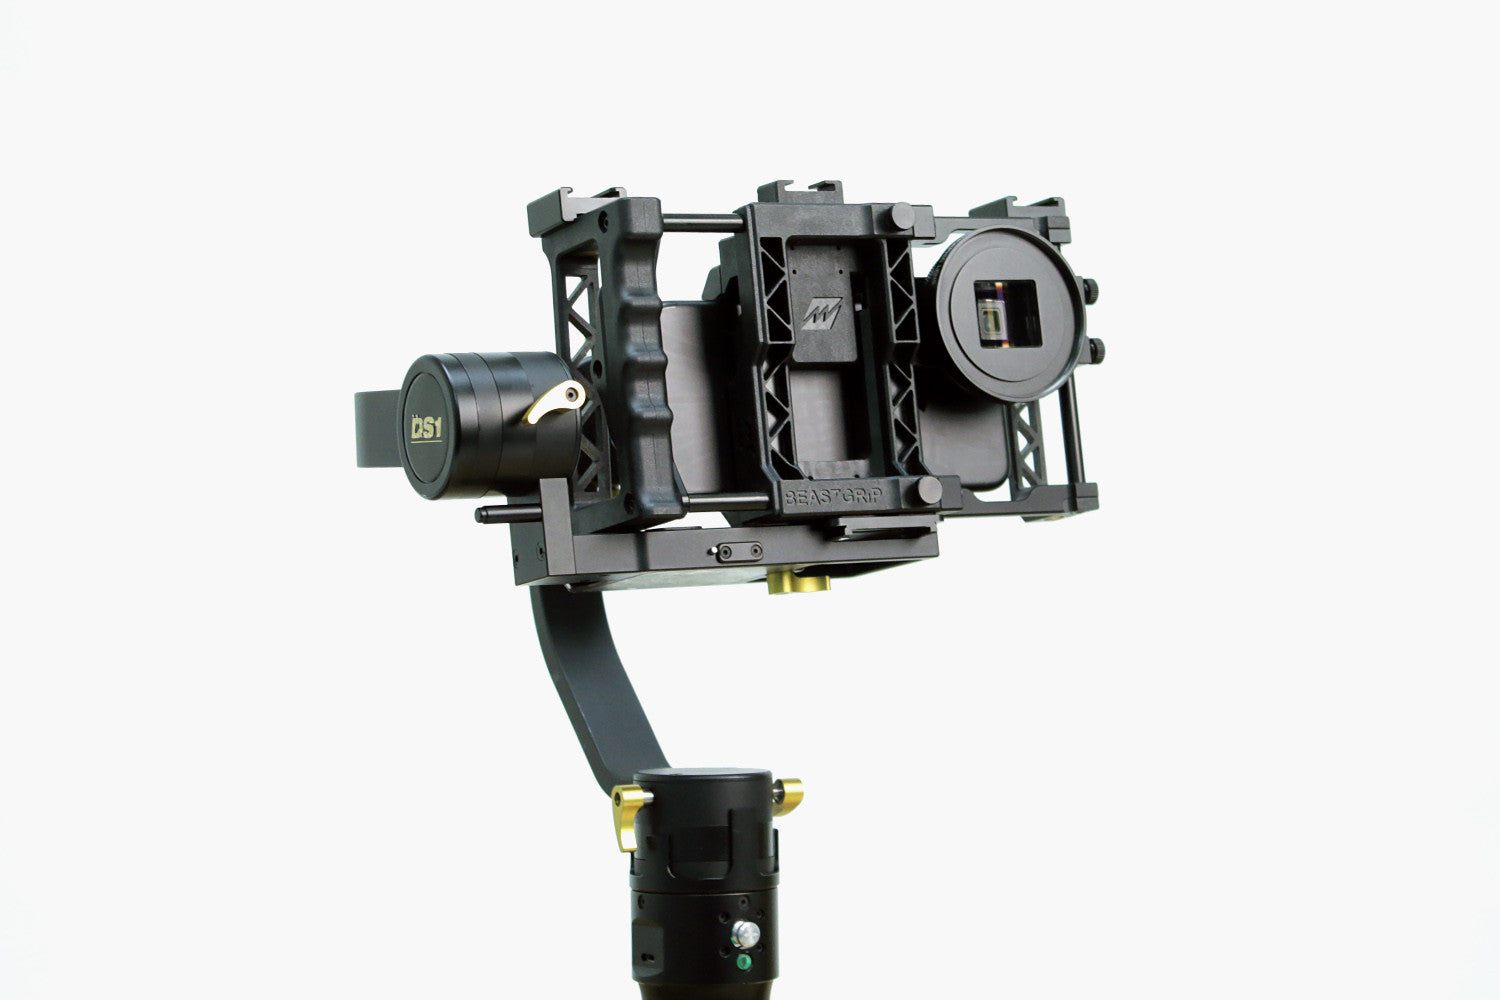 Beastgrip Pro with  a Beastgrip Pro Series 1.33X Anamorphic Lens on an Owl Dolly DS1 Gimbal